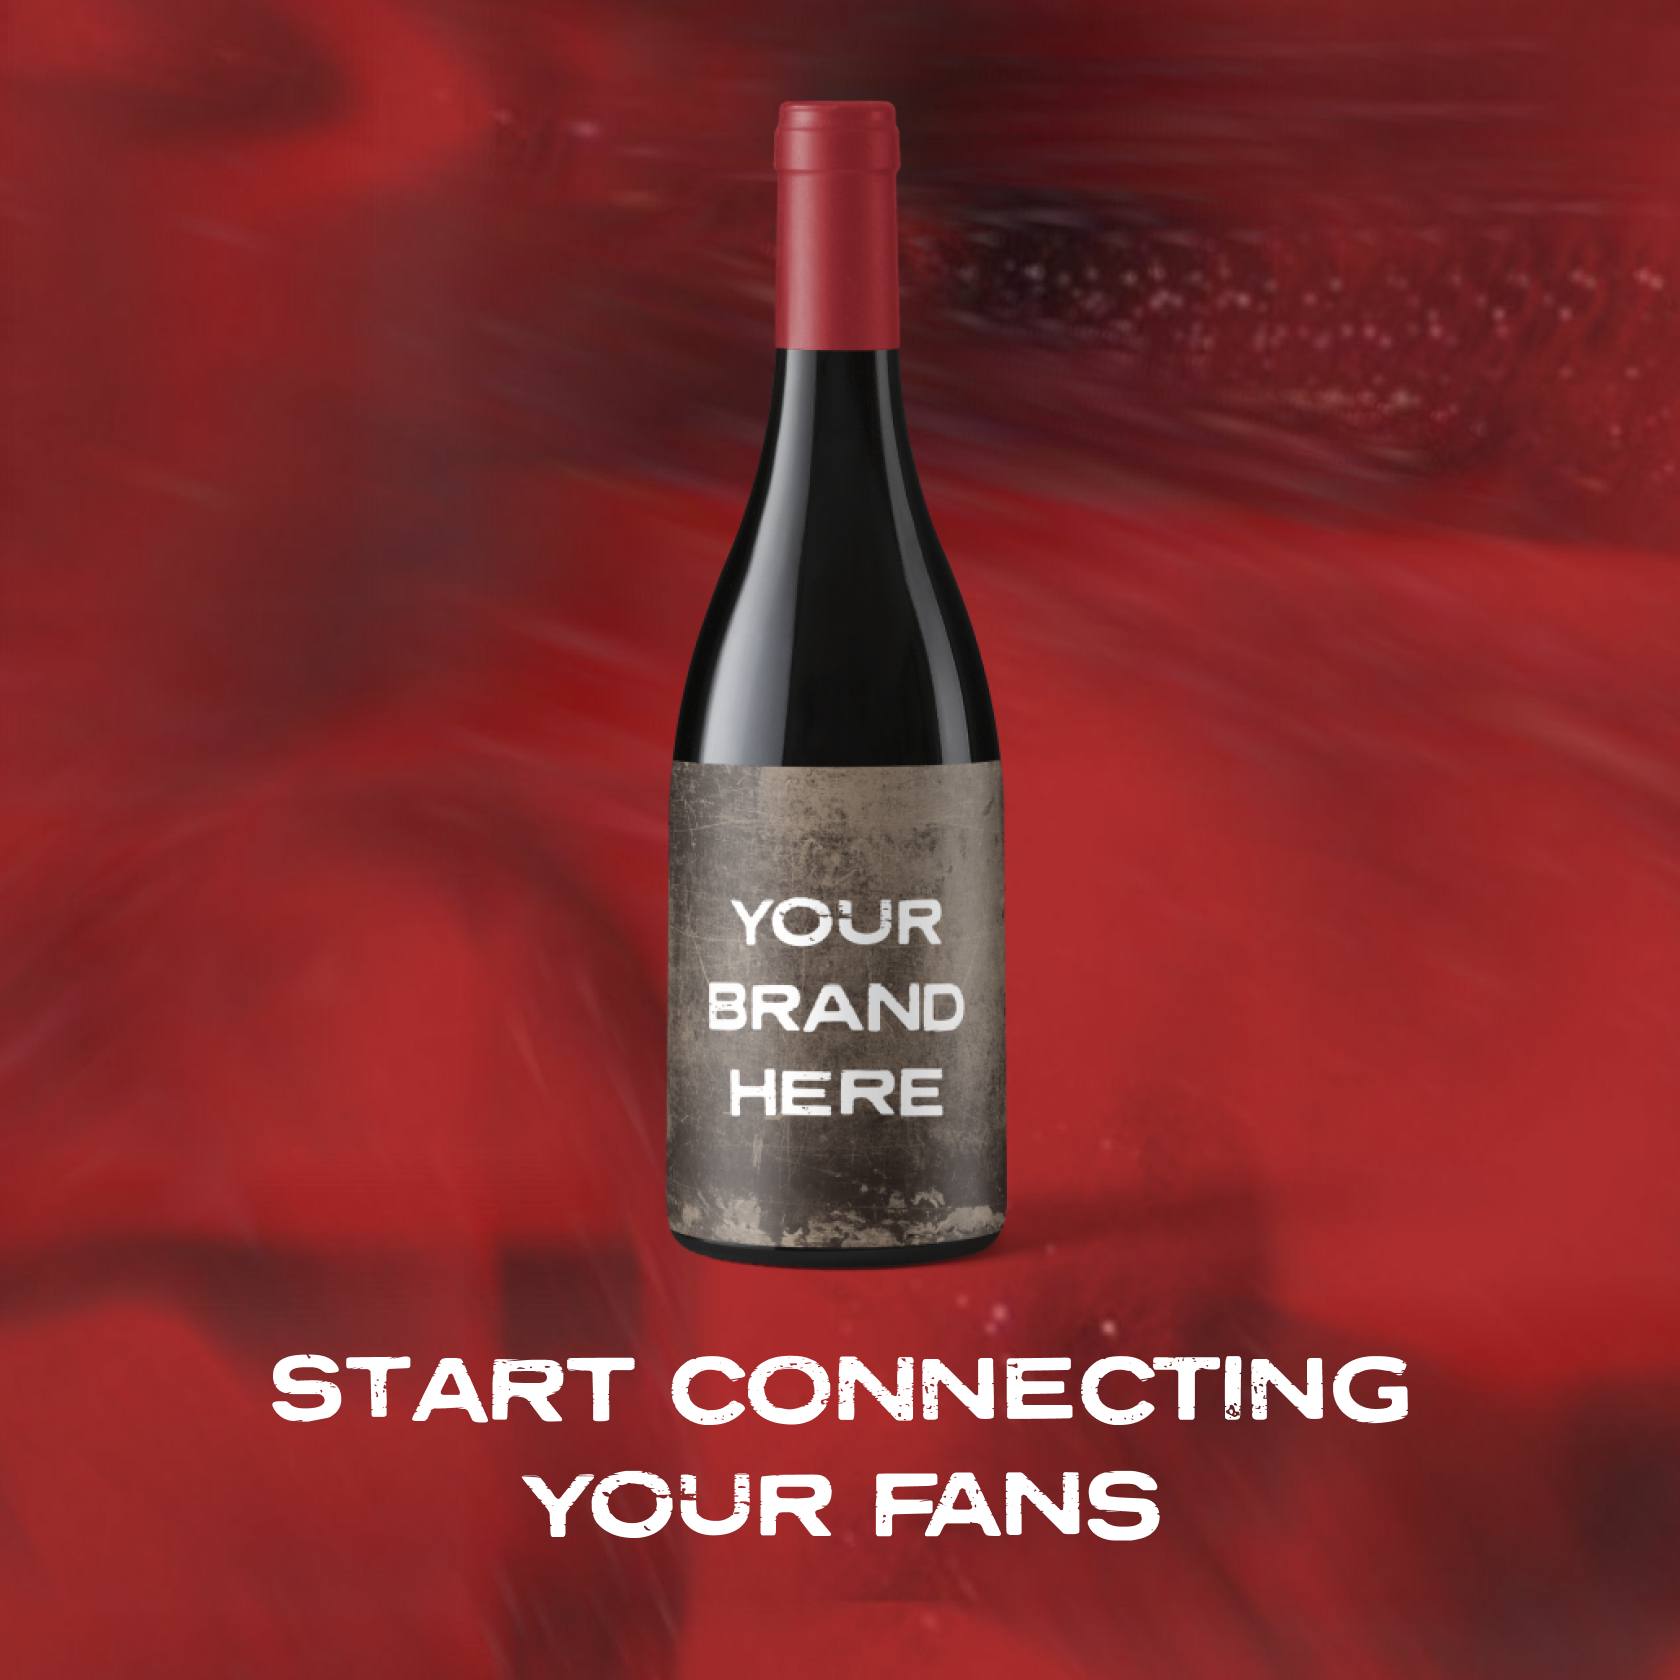 Wine bottle with label that says "your brand here". Start connecting your fans